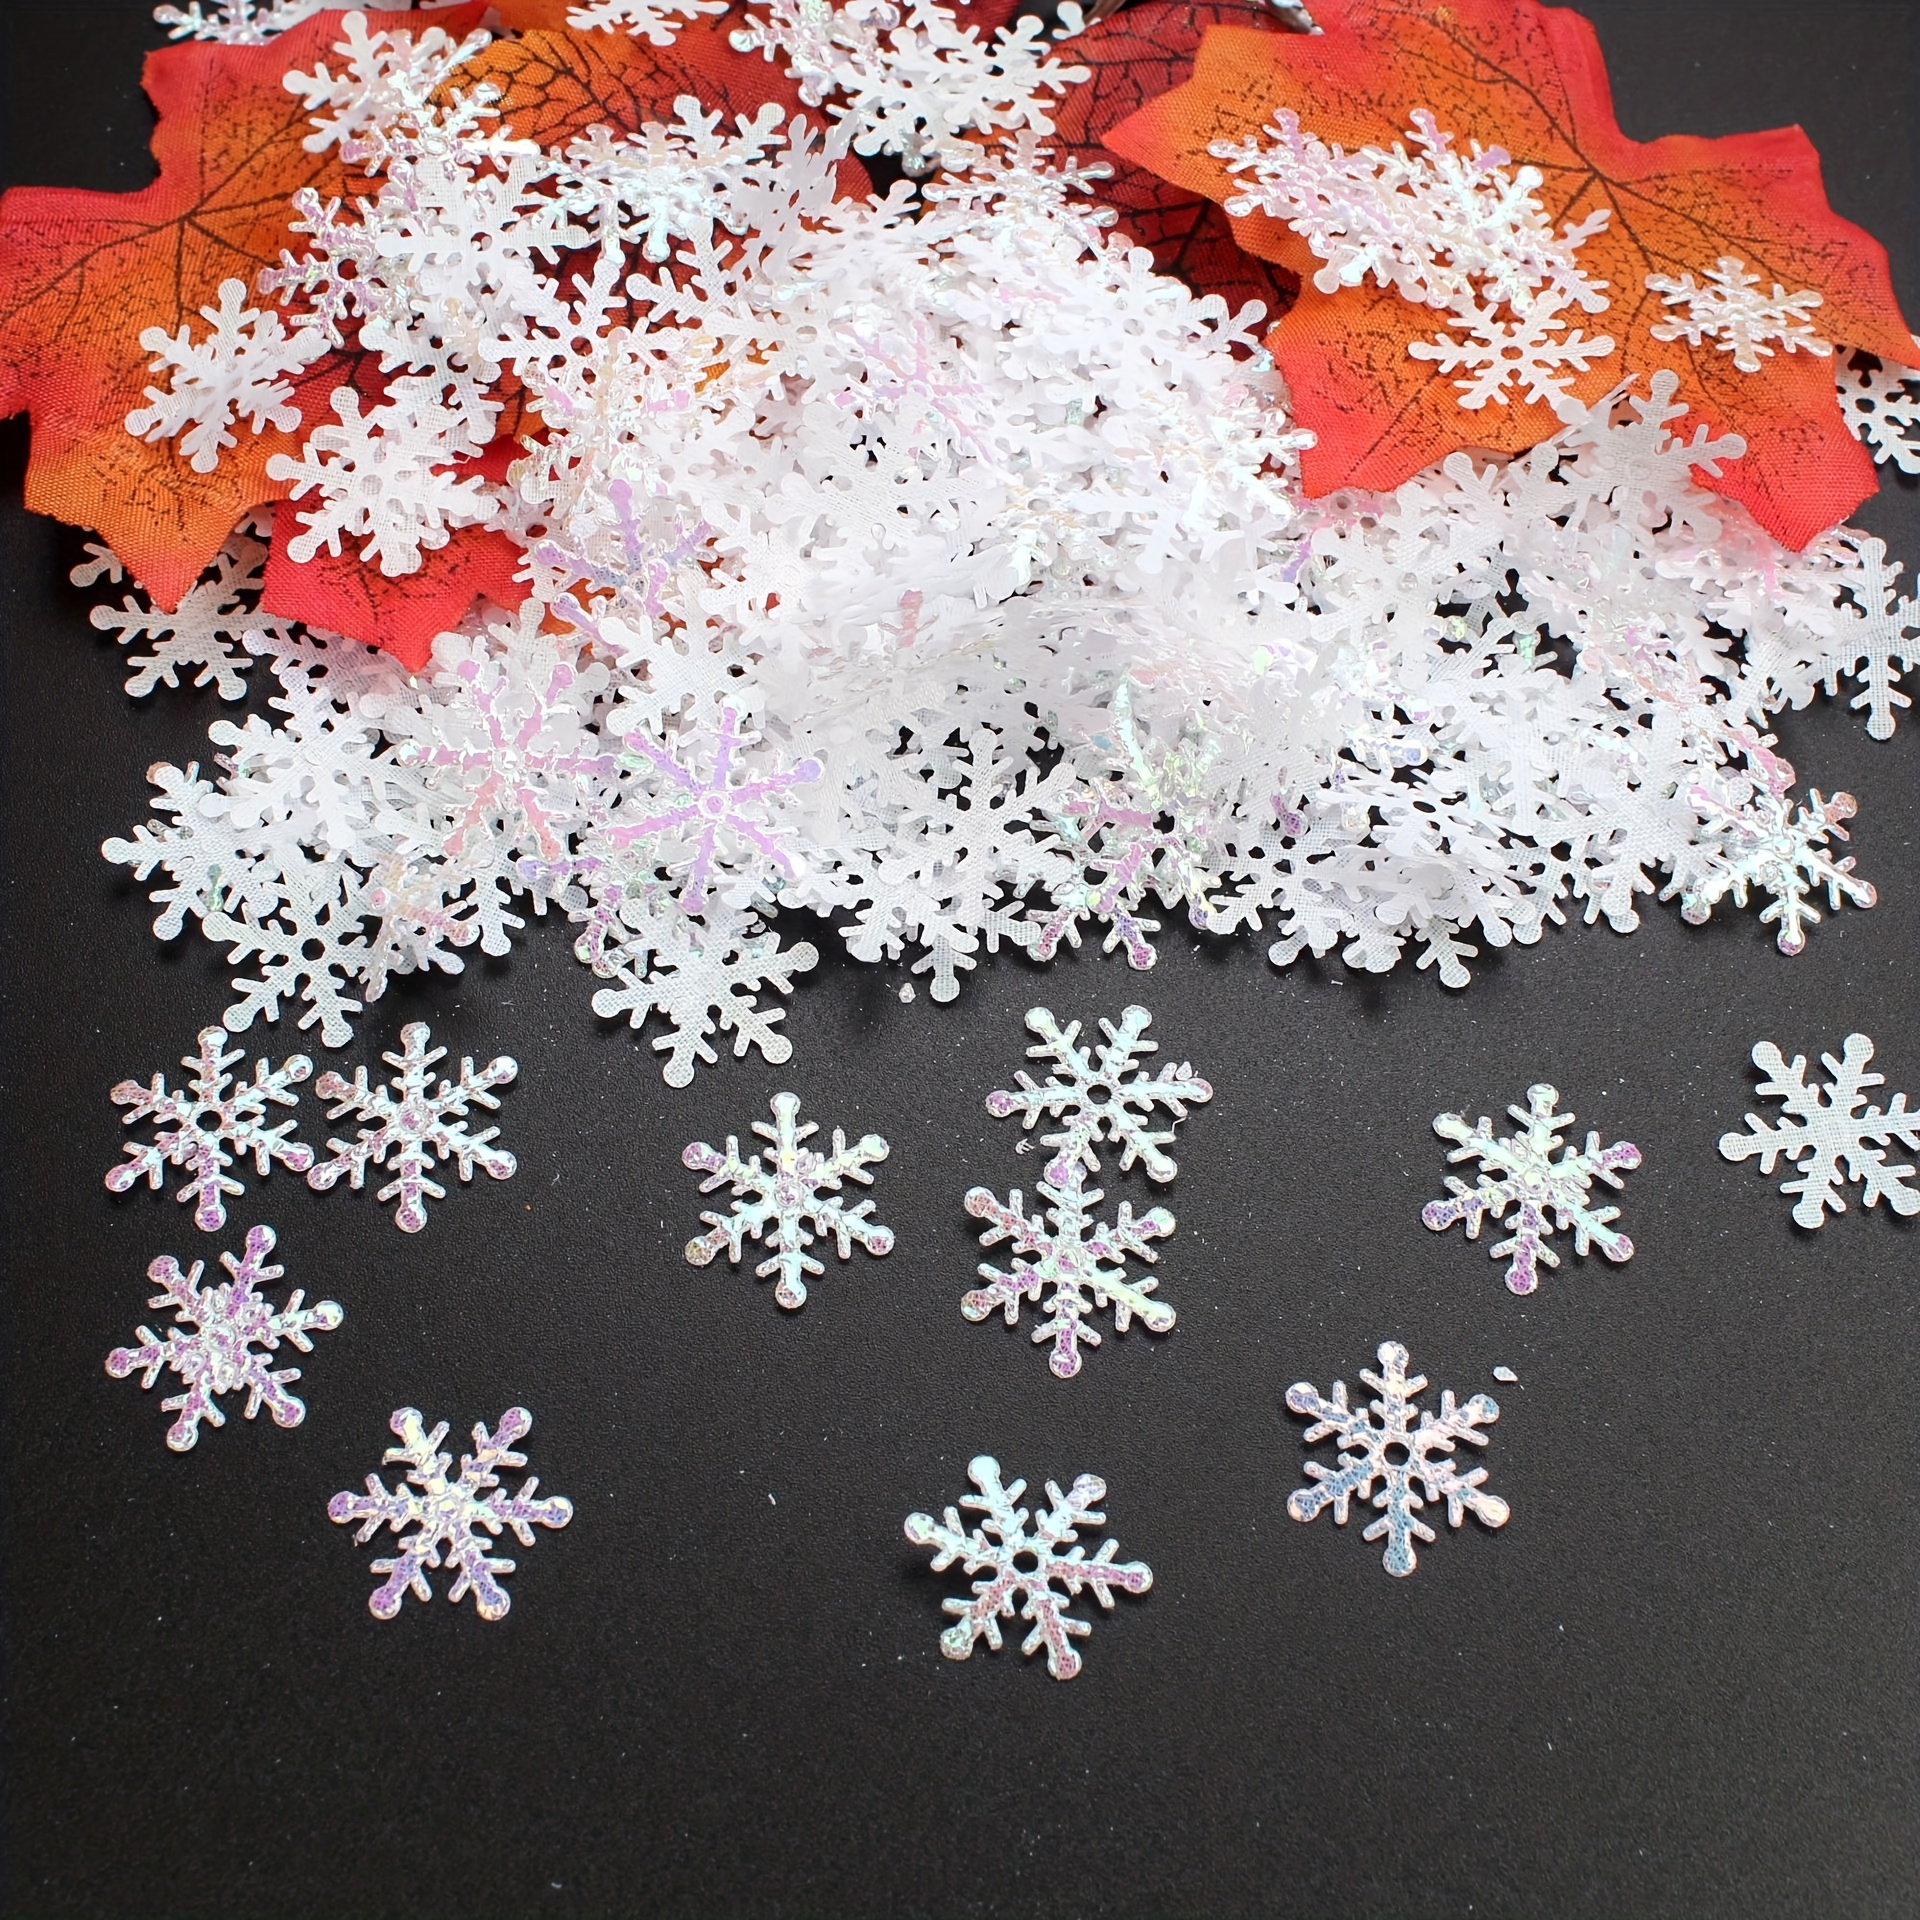 Oumuamua 1200pcs Snowflakes Confetti Decorations for Christmas - White and Blue Winter Confetti Snow Party Pack for Wedding Birthday Holiday Party